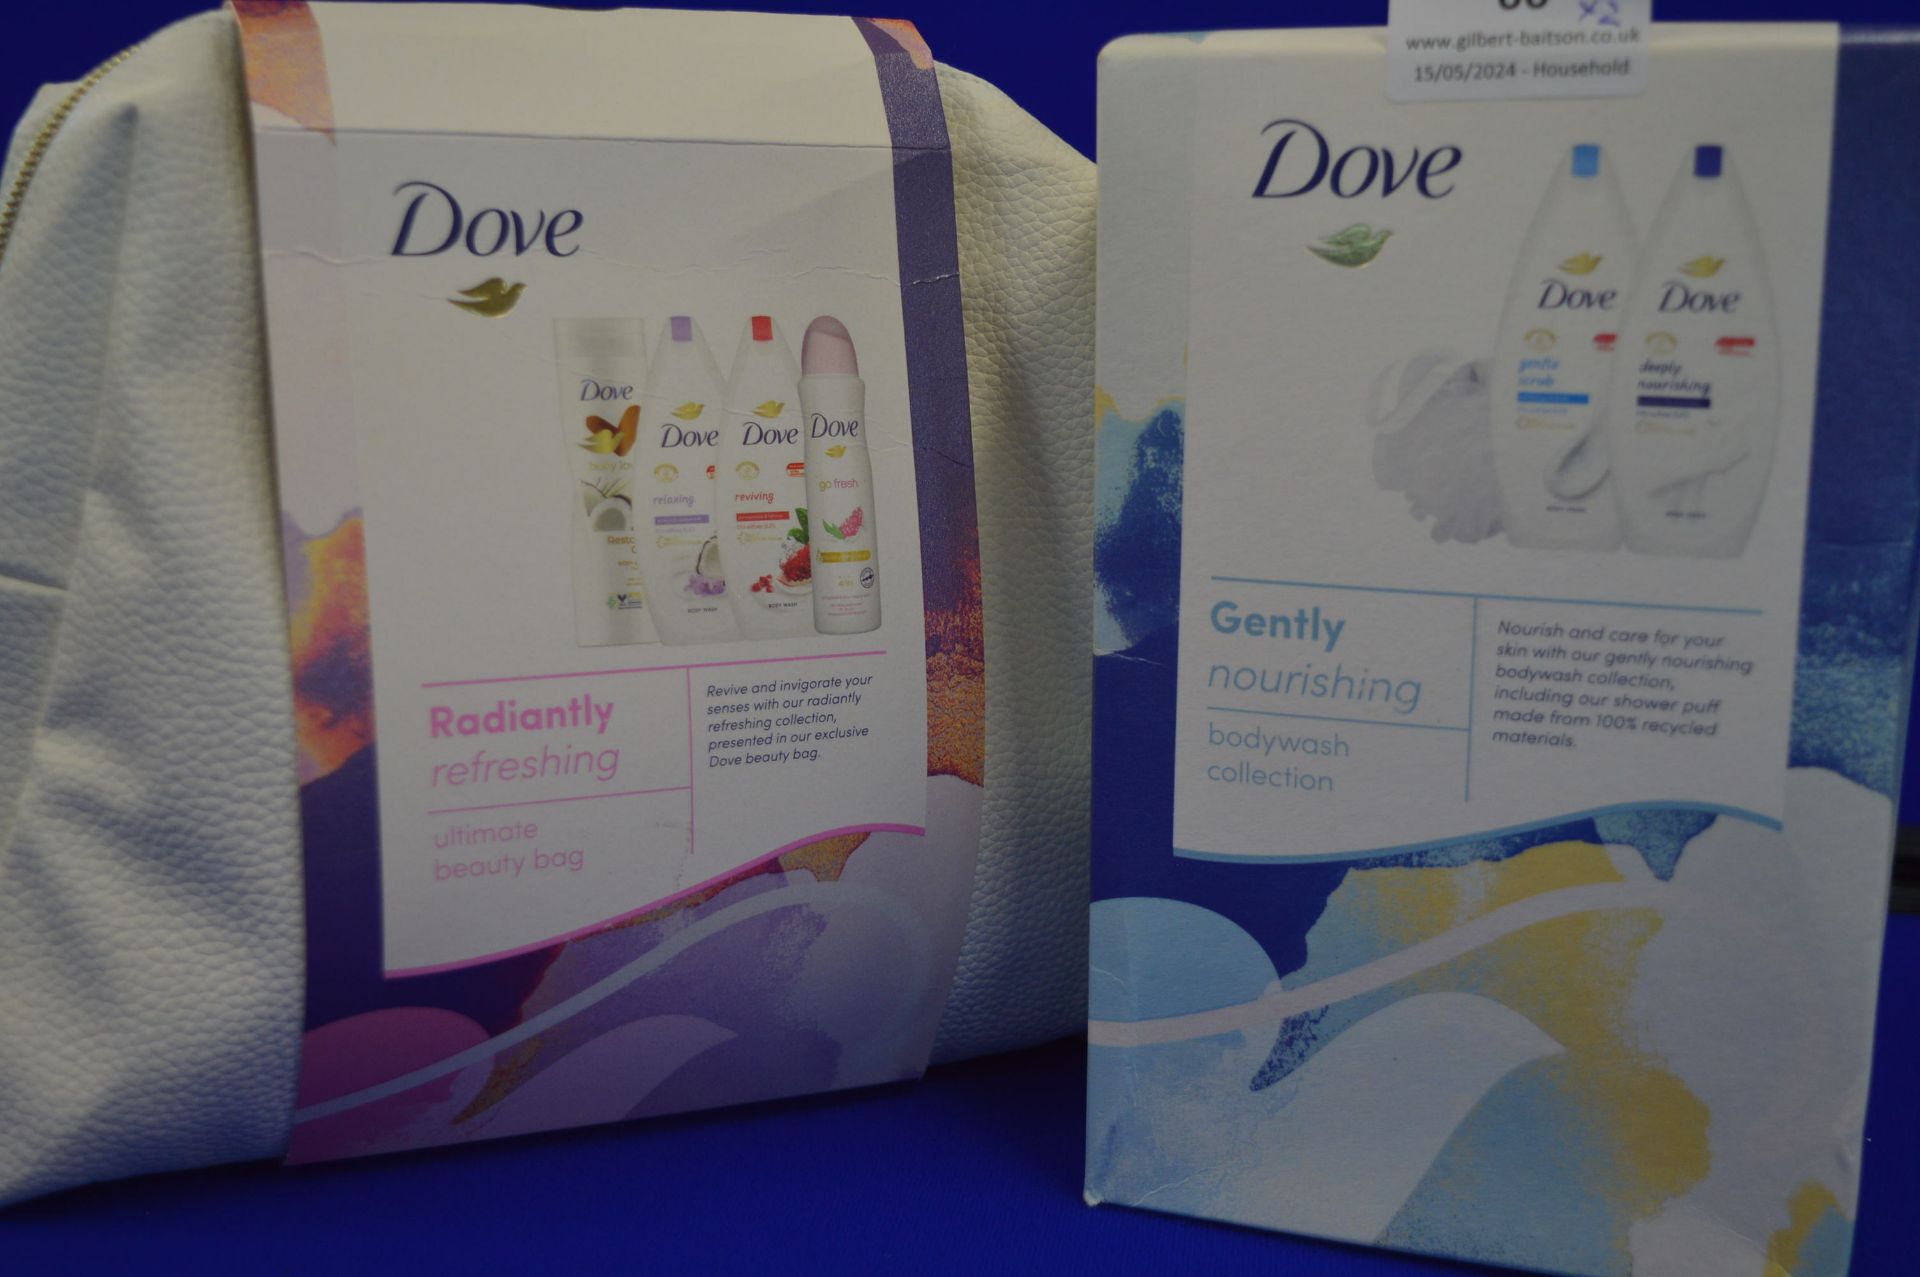 Dove Beauty Bag and Body Wash Collection